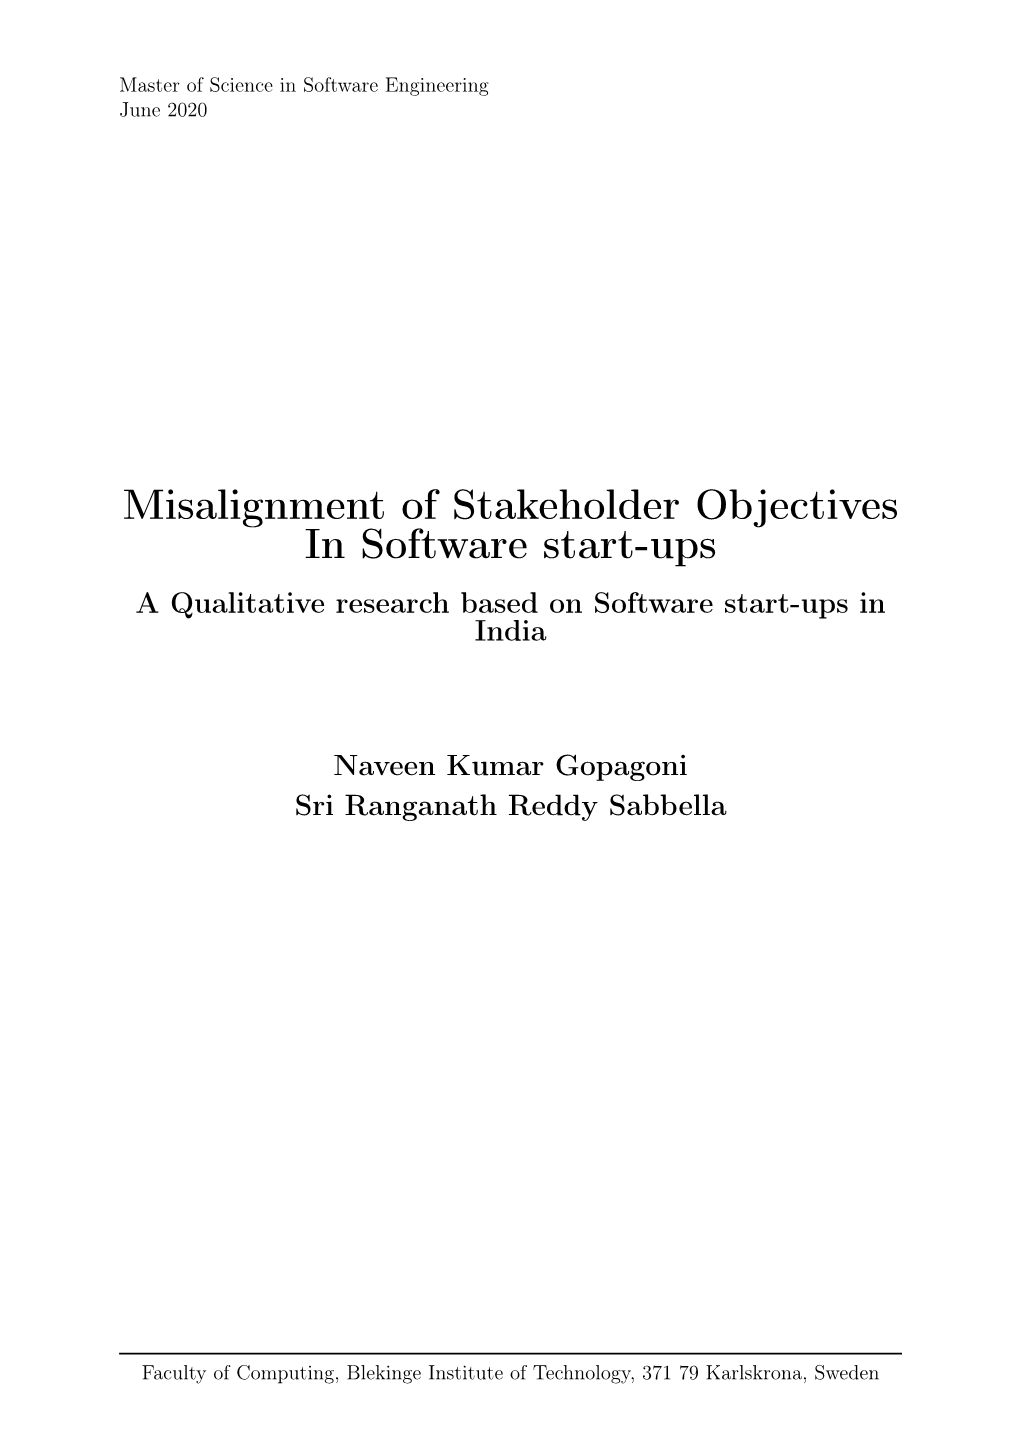 Misalignment of Stakeholder Objectives in Software Start-Ups a Qualitative Research Based on Software Start-Ups in India